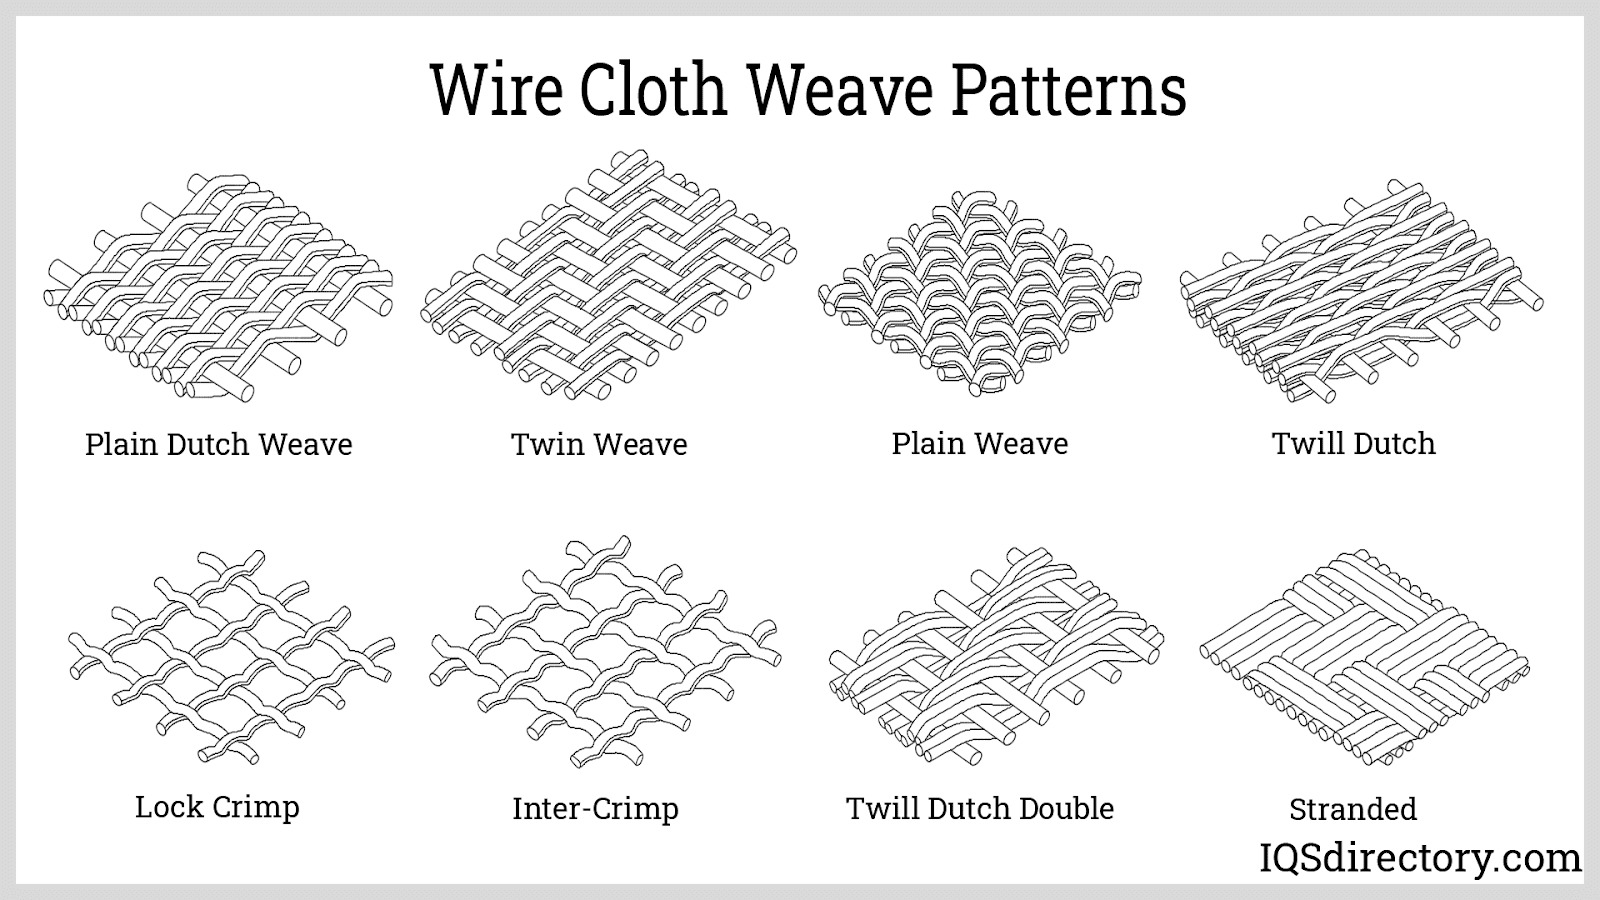 https://www.iqsdirectory.com/articles/wire-mesh/wire-cloth/wire-cloth-weave-patterns.jpg